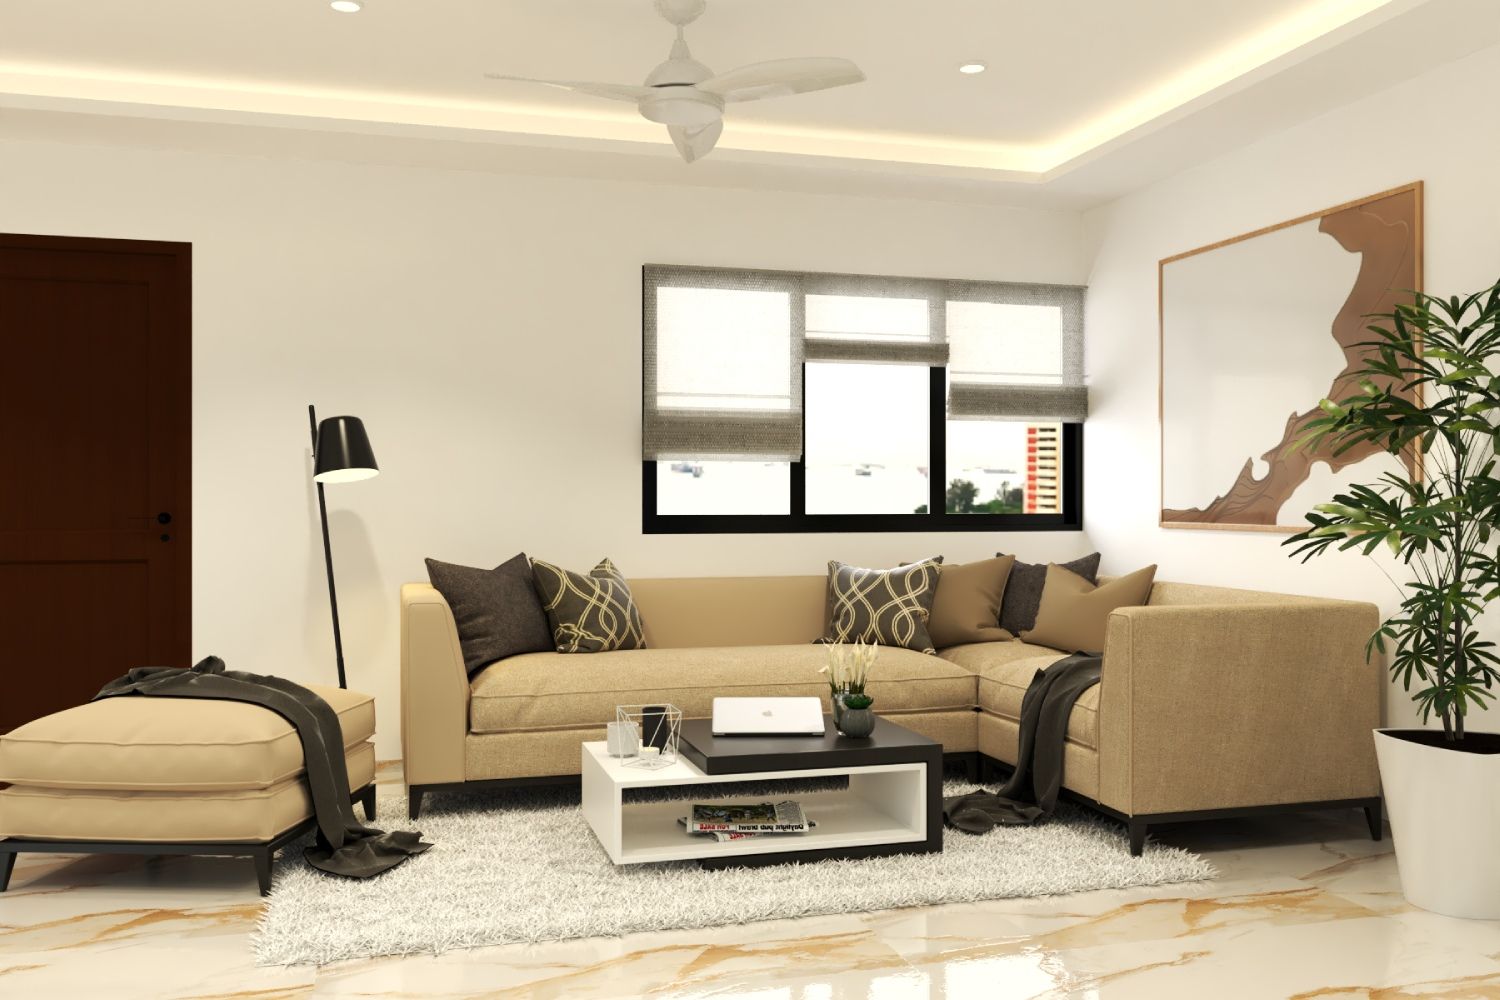 Contemporary Interior Design With An L-Shaped Beige Sofa